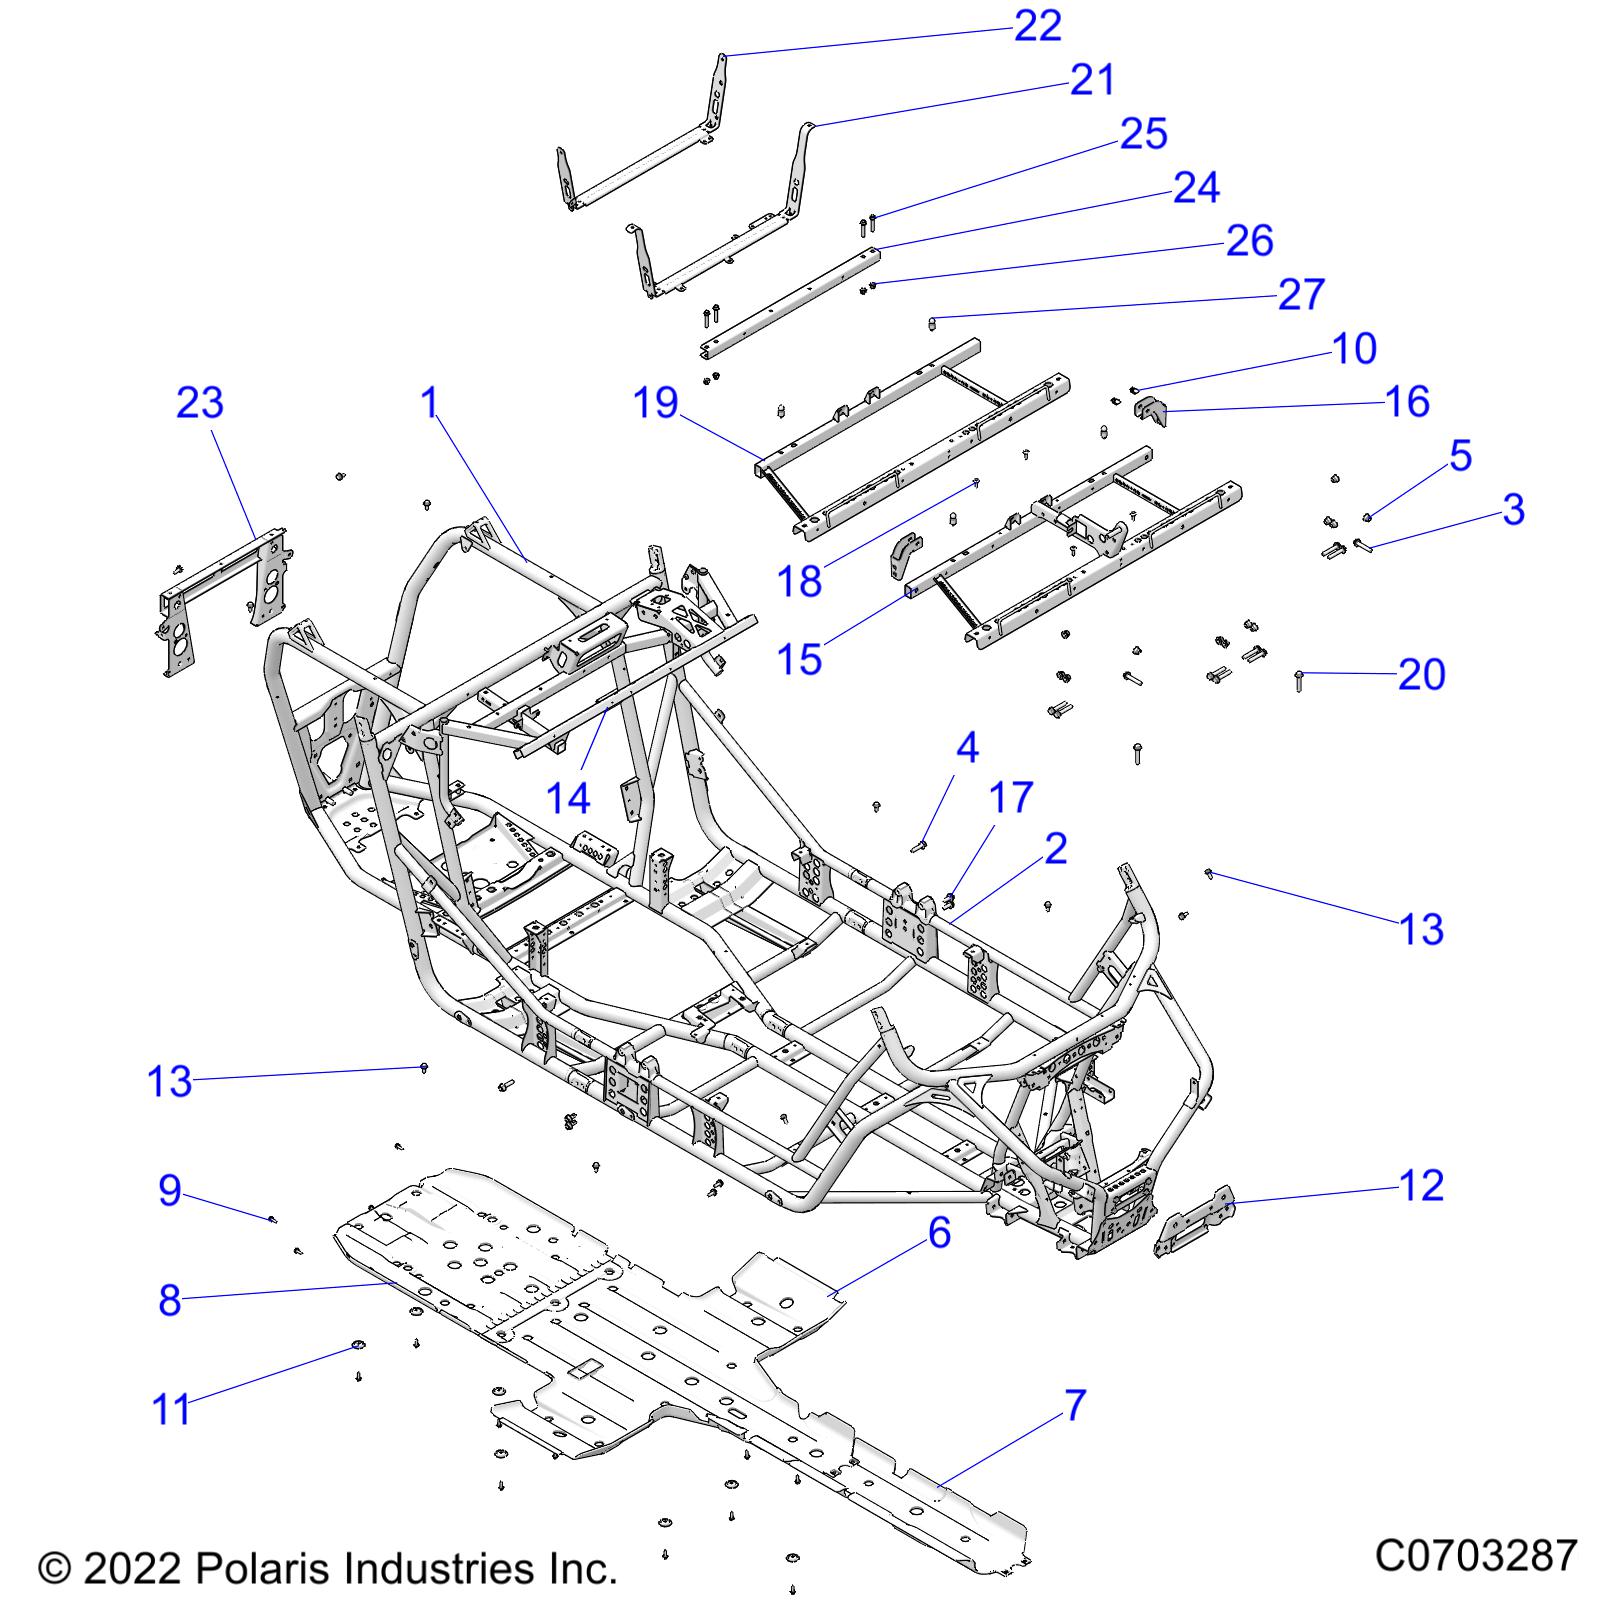 Part Number : 1024370-458 MAIN FRAME SECTION  FRONT  MAT